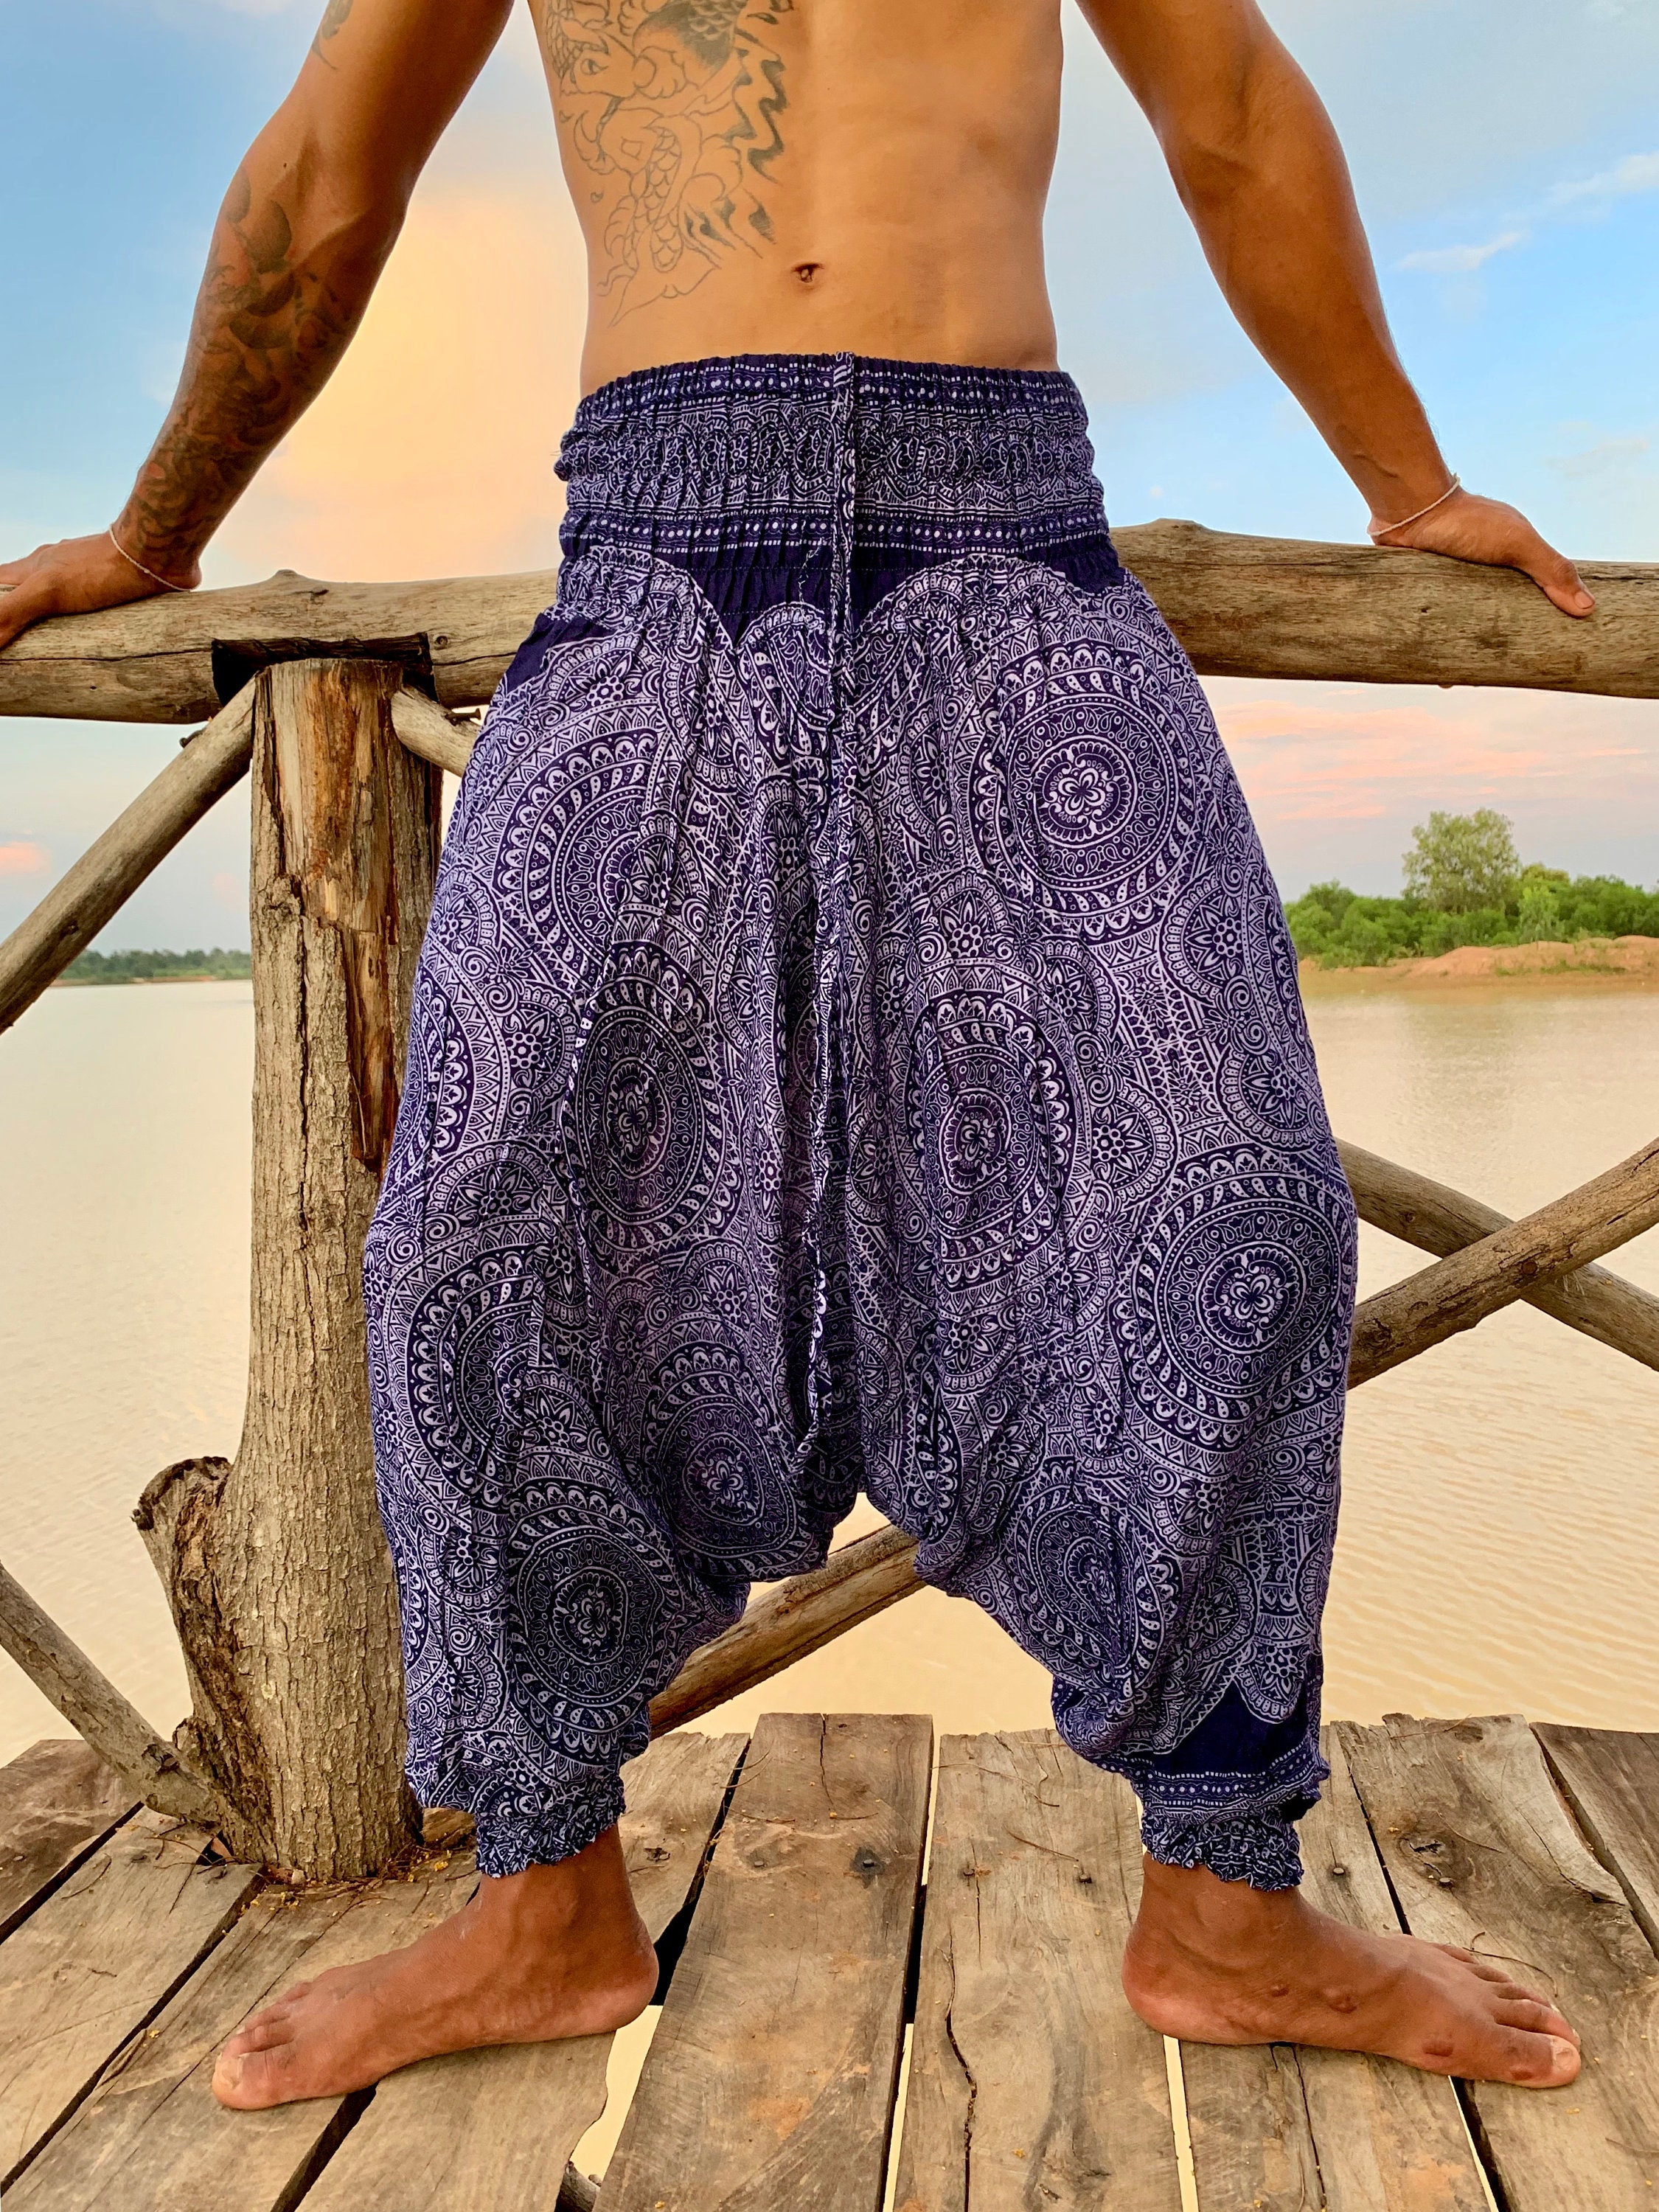 Nuofengkudu Womens Harem Hippie Yoga Pants Cotton Baggy Boho Patterned Smocked High Waist with Pockets Thai Fisherman Trousers Summer Beach 